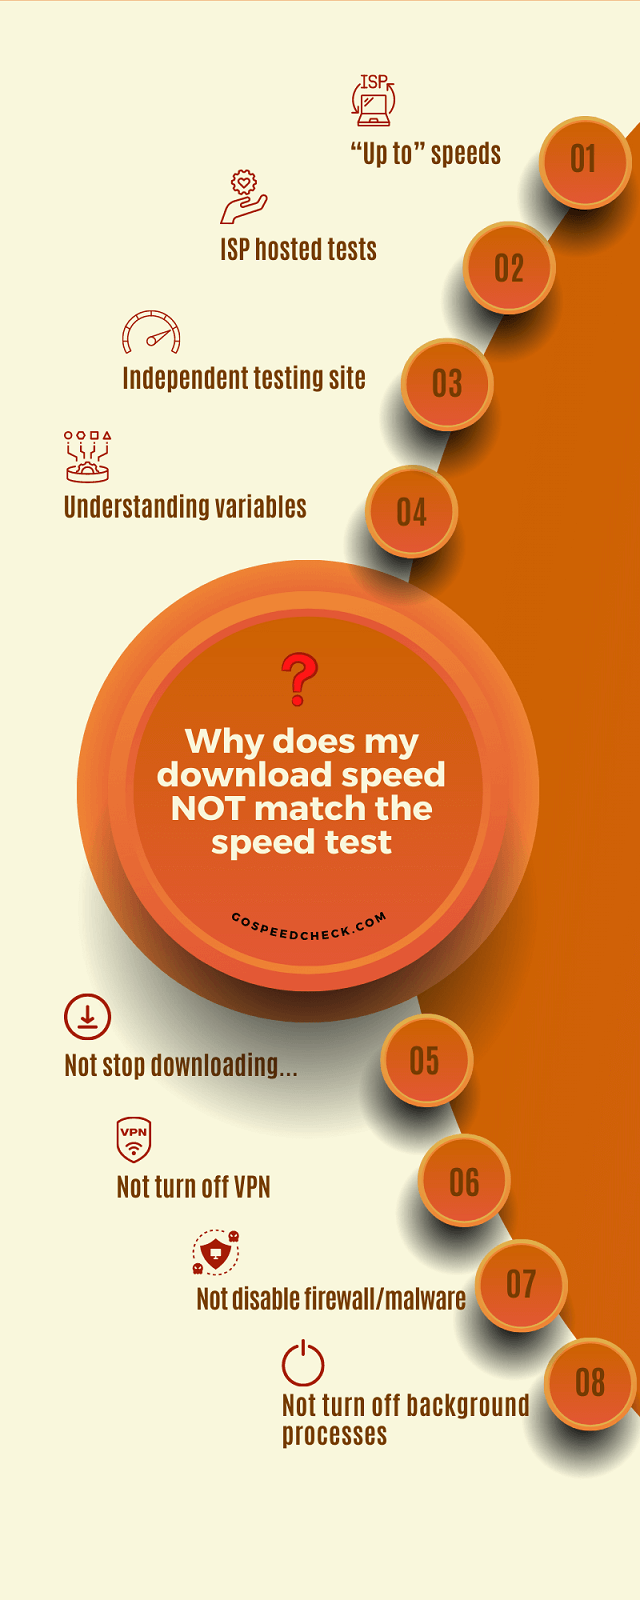 8 reasons causing download speed to differ from the test result